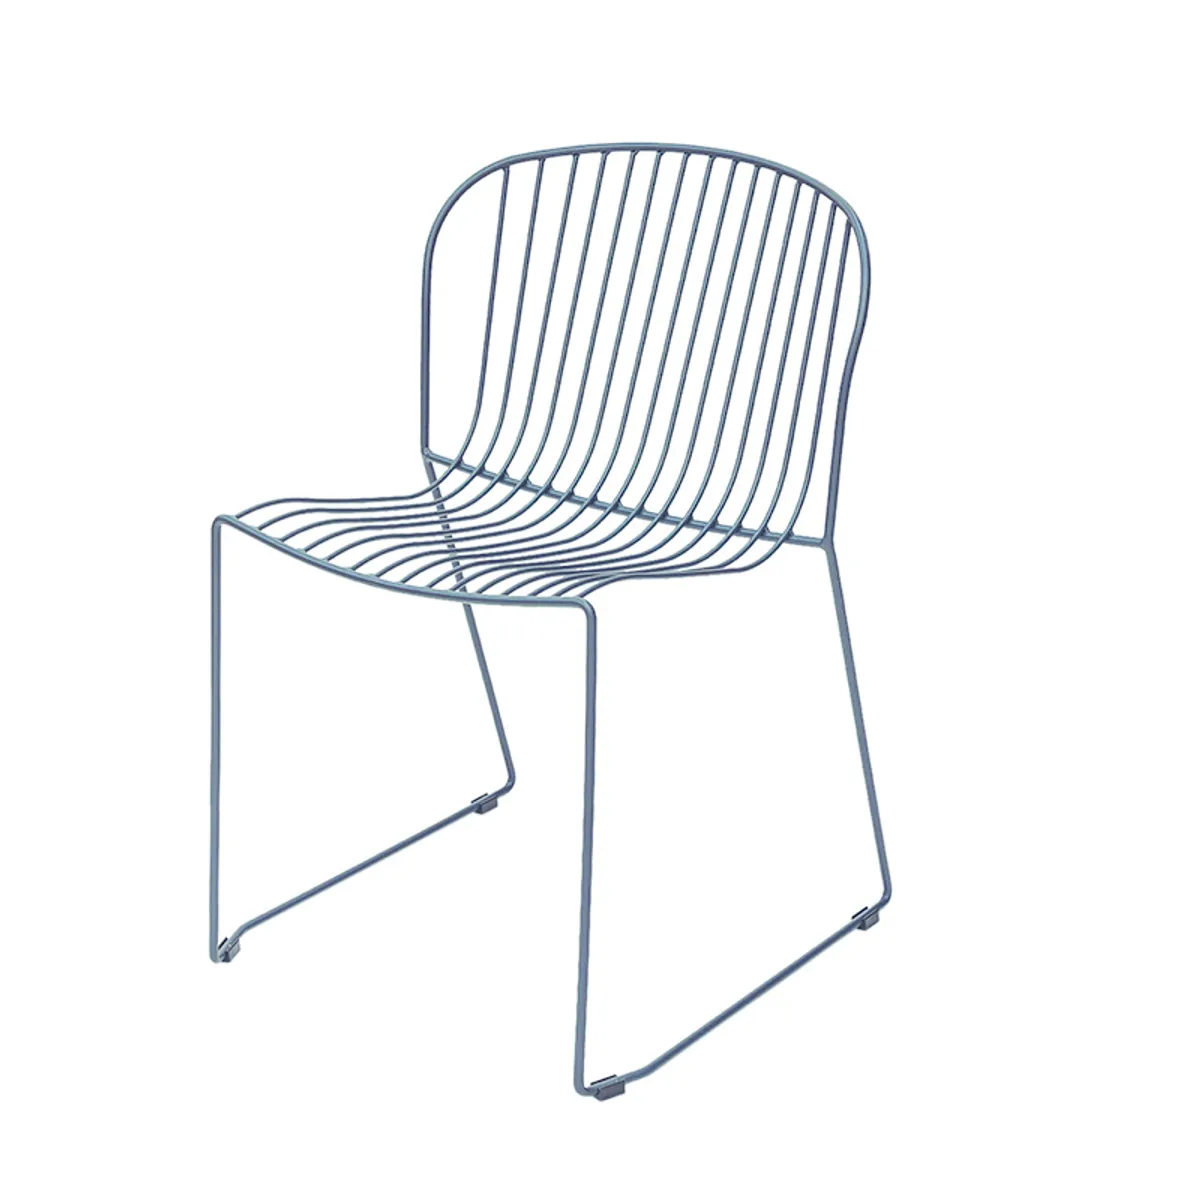 Bali Chair In Black Metal Outdoor Contract Suitable Furniture For Cafes And Bars Insideoutcontracts